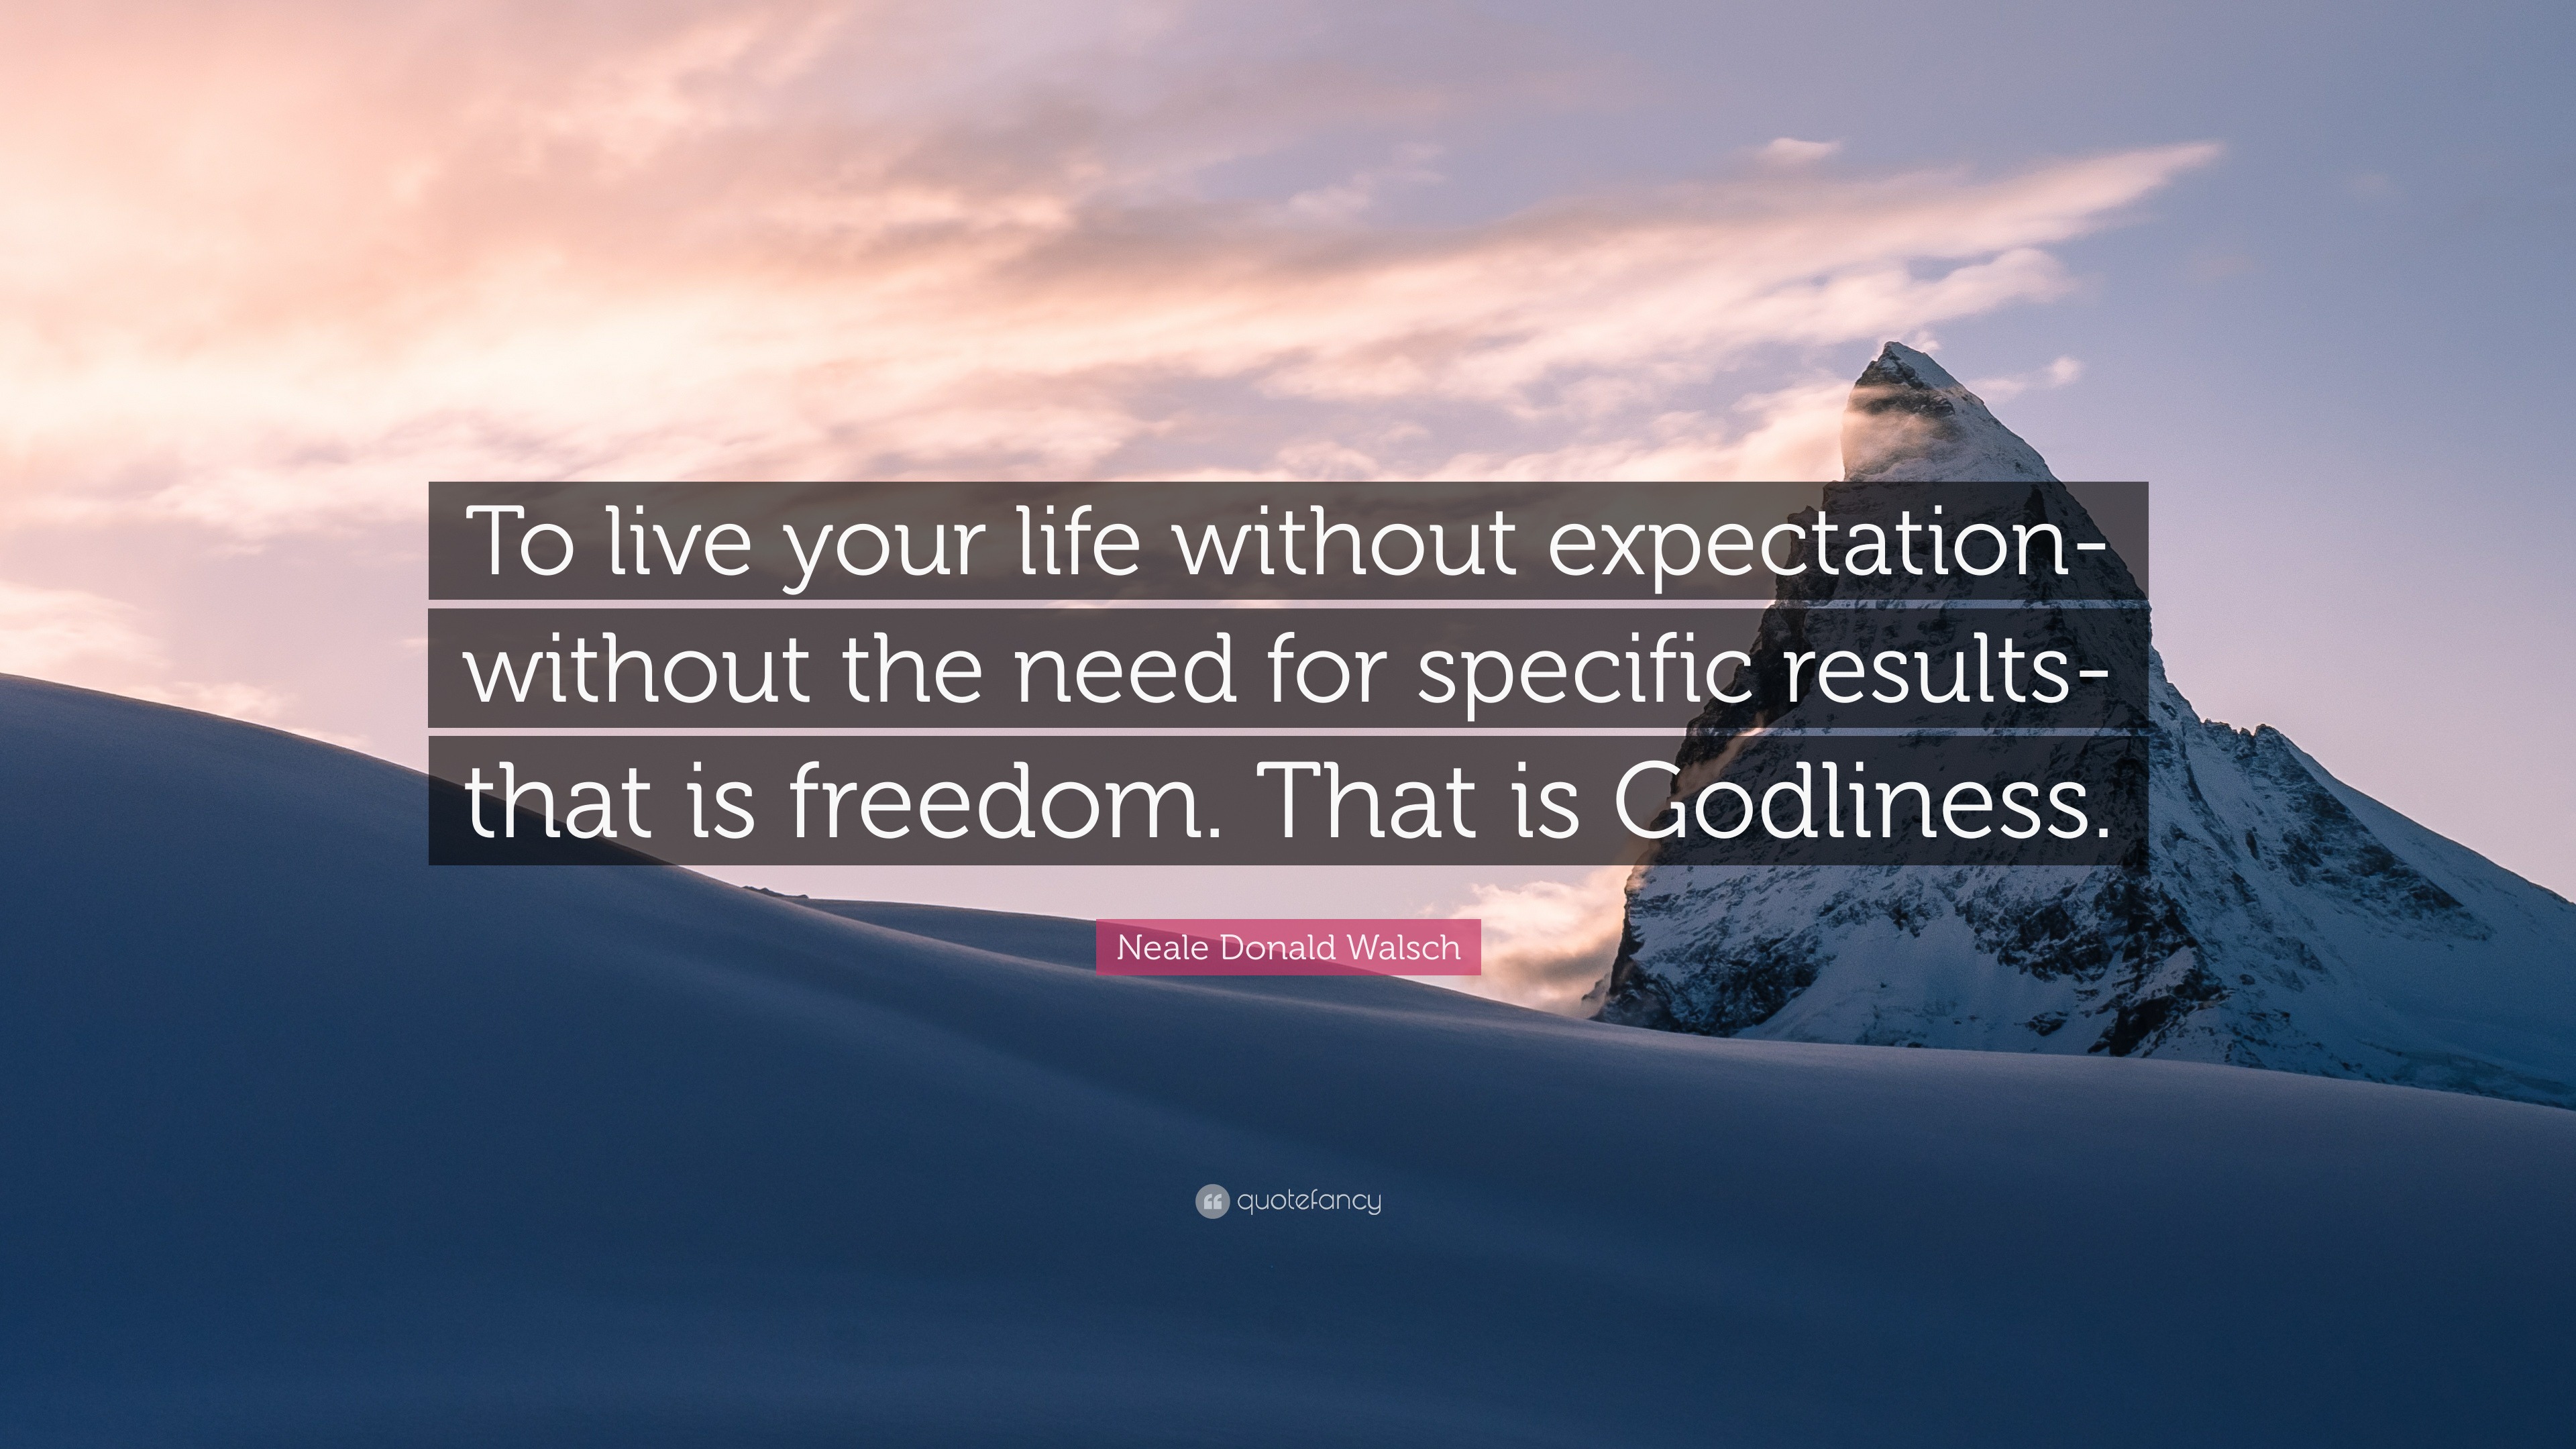 Neale Donald Walsch Quote “To live your life without expectation without the need